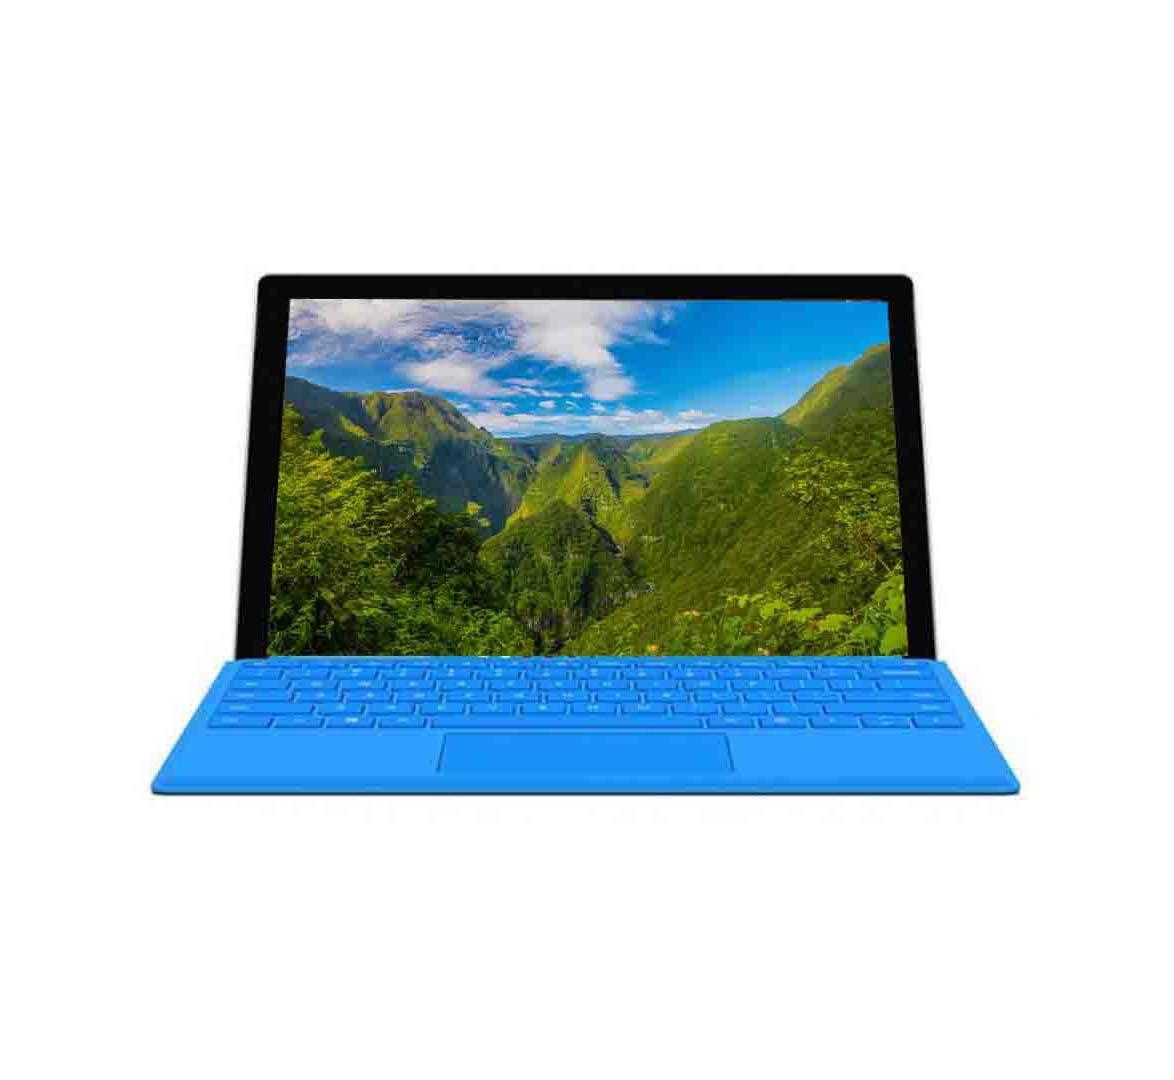 Refurbished: Microsoft Surface Pro 4 Tablet PC 2-in-1 Intel Core